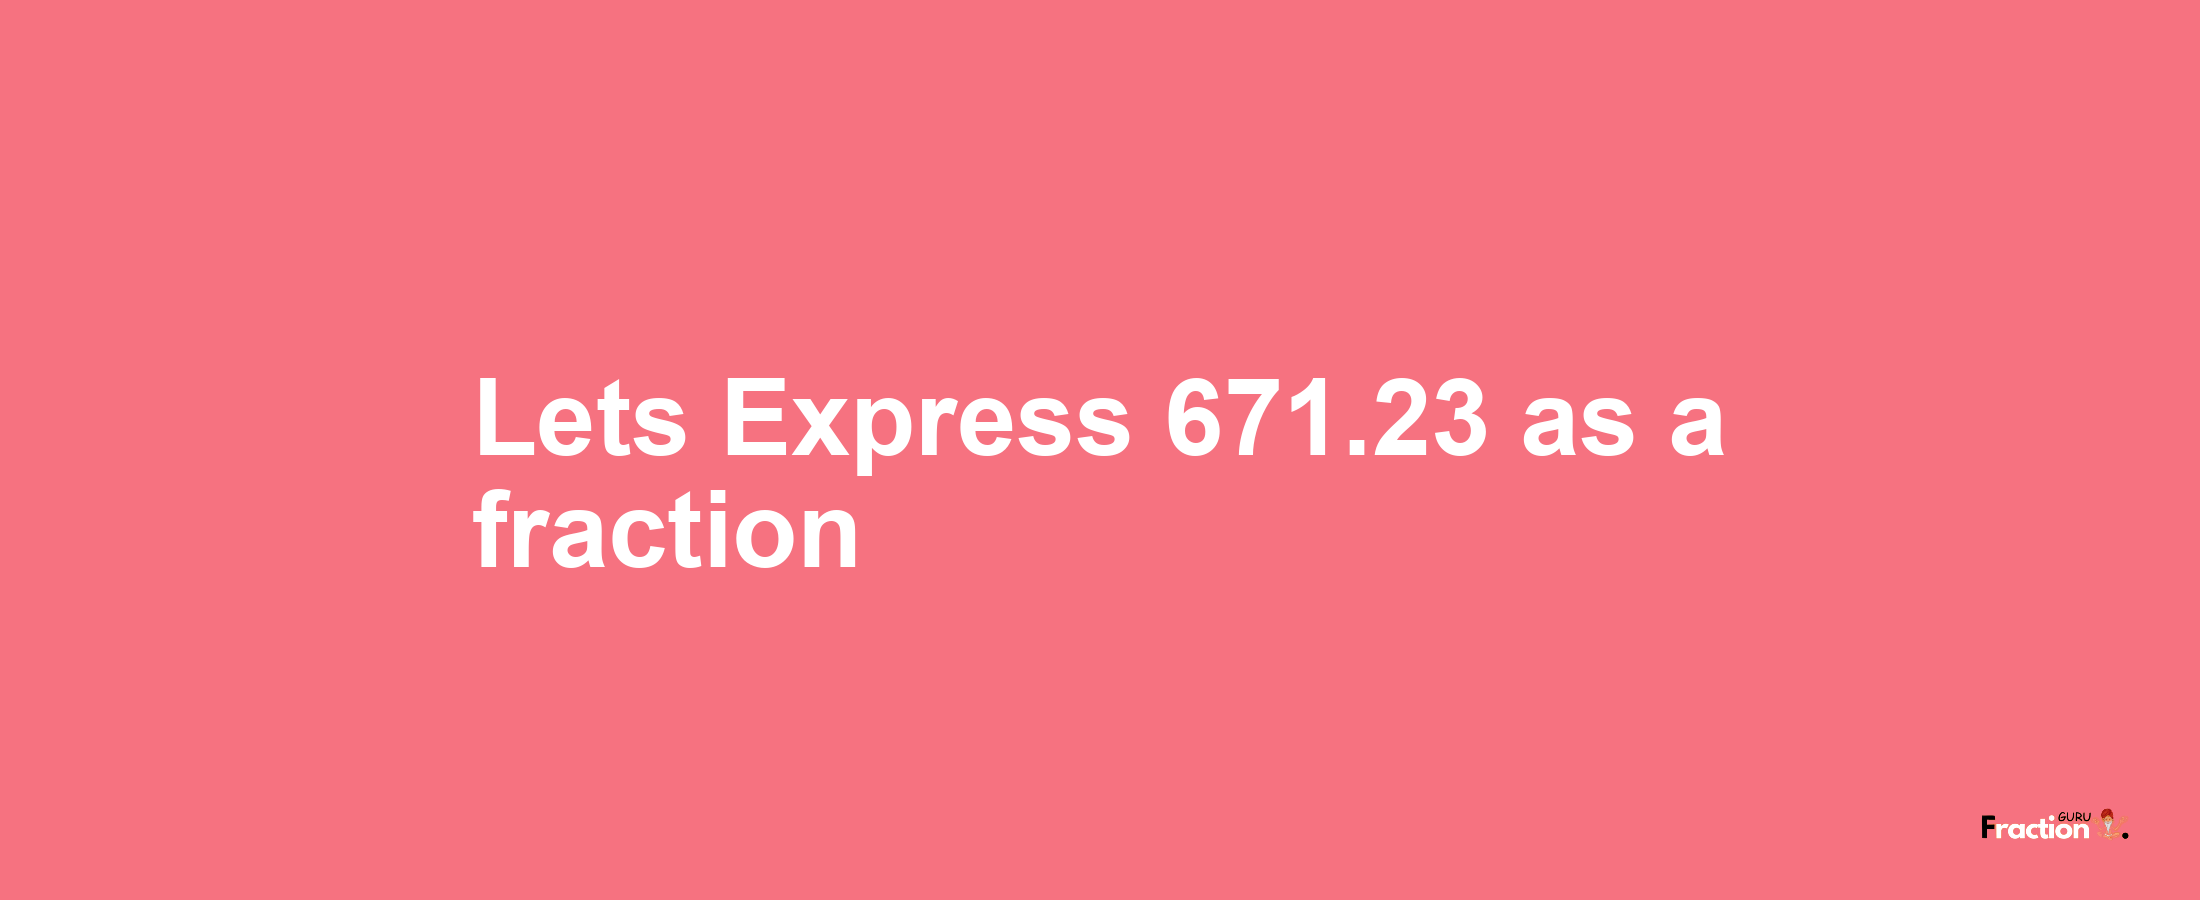 Lets Express 671.23 as afraction